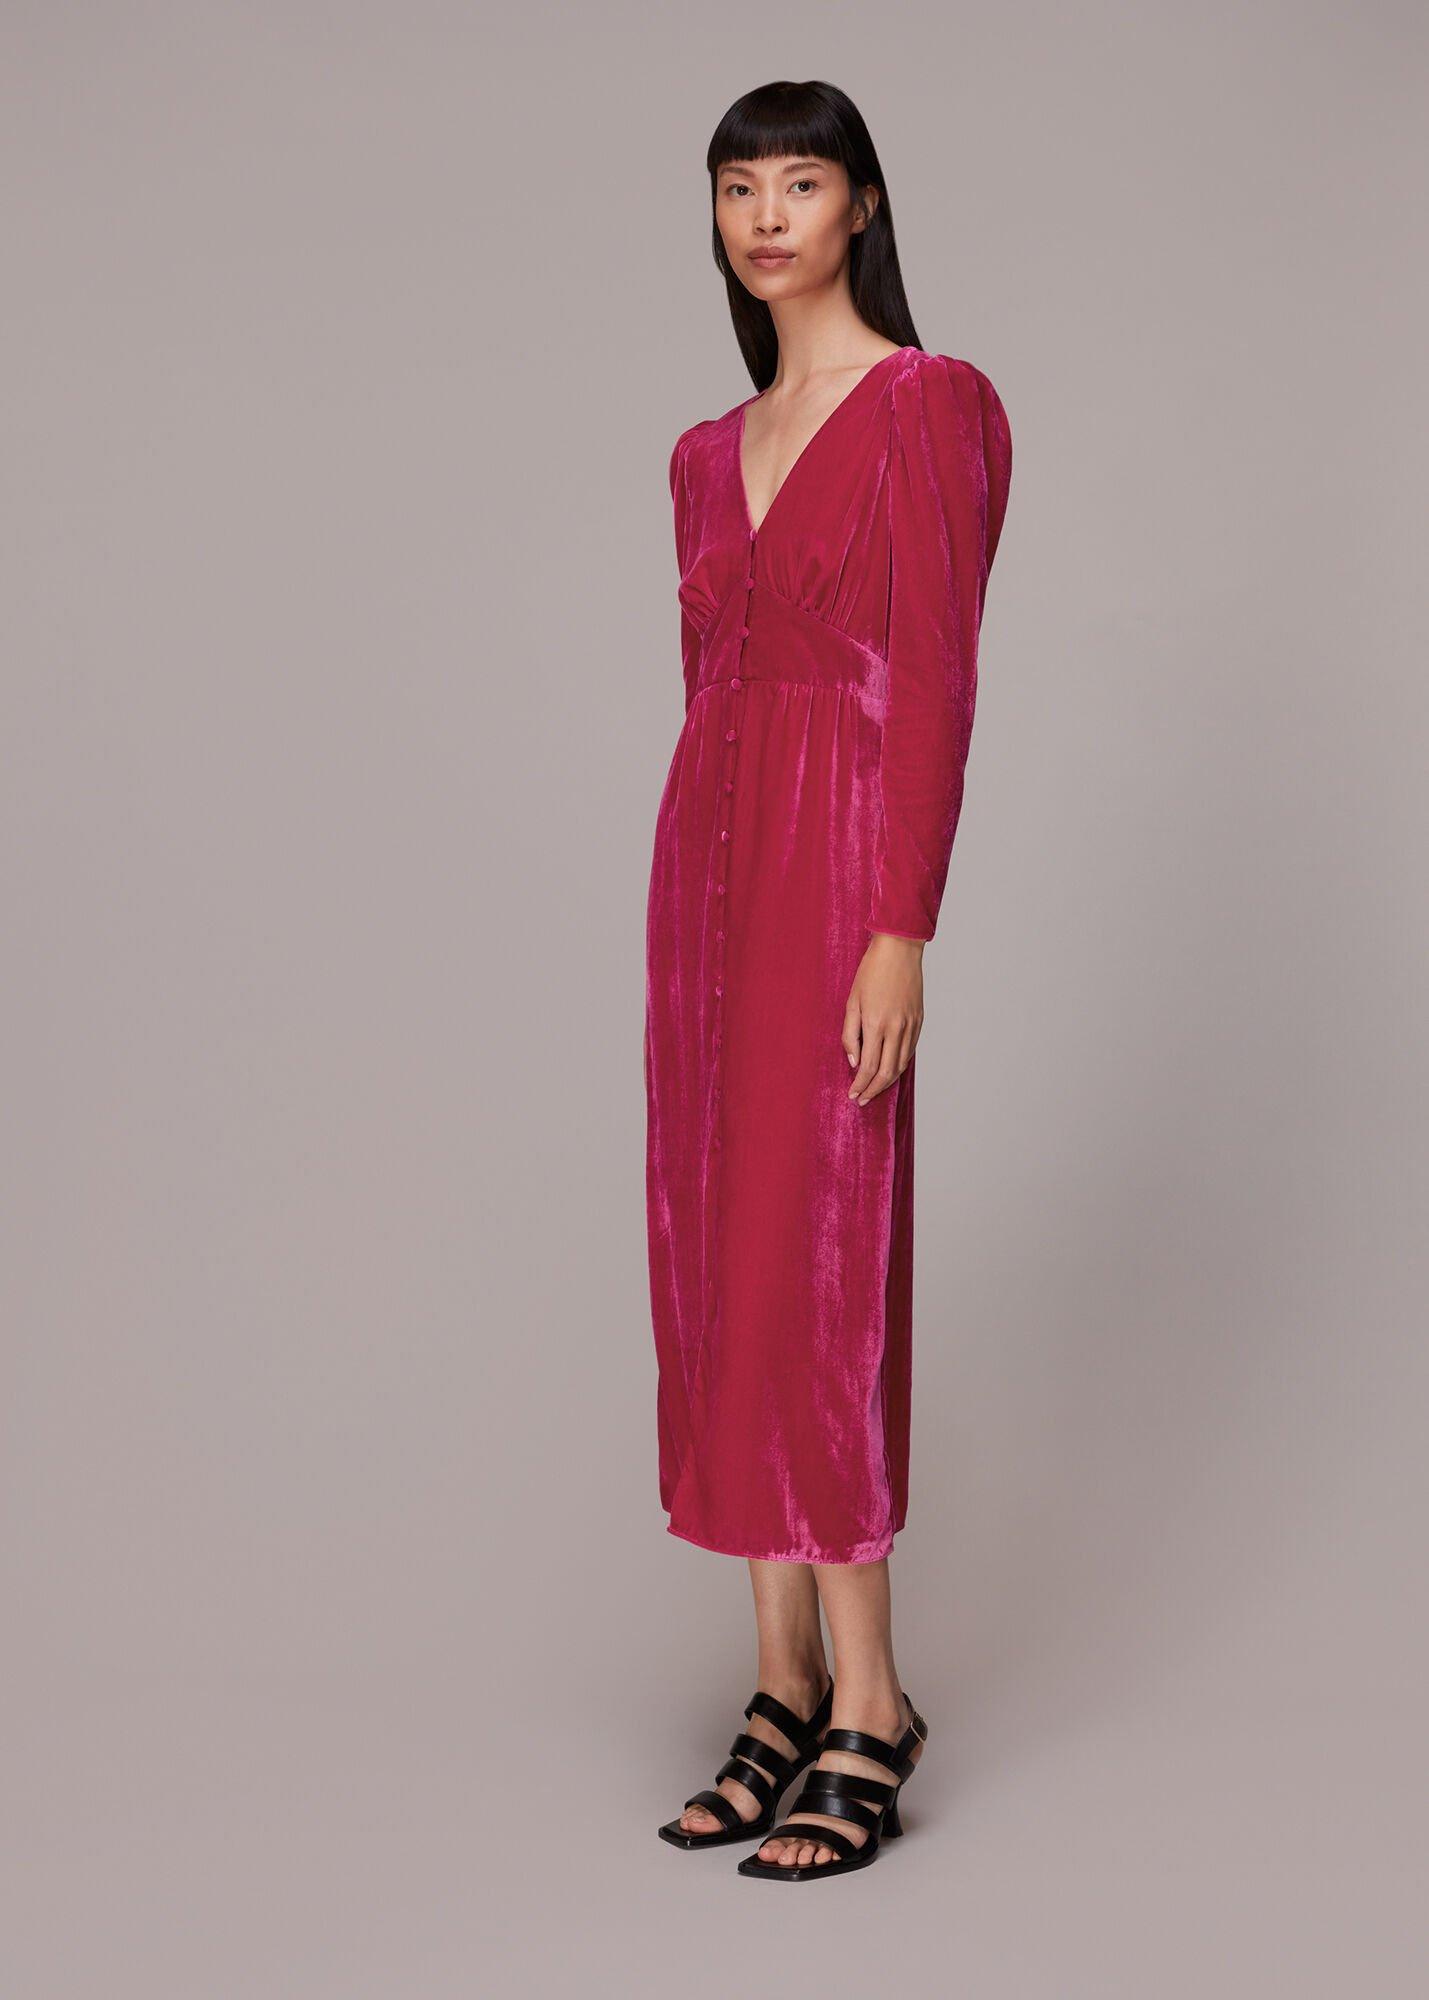 Velvet Bridesmaid Dresses: 26 Chic Styles - hitched.co.uk